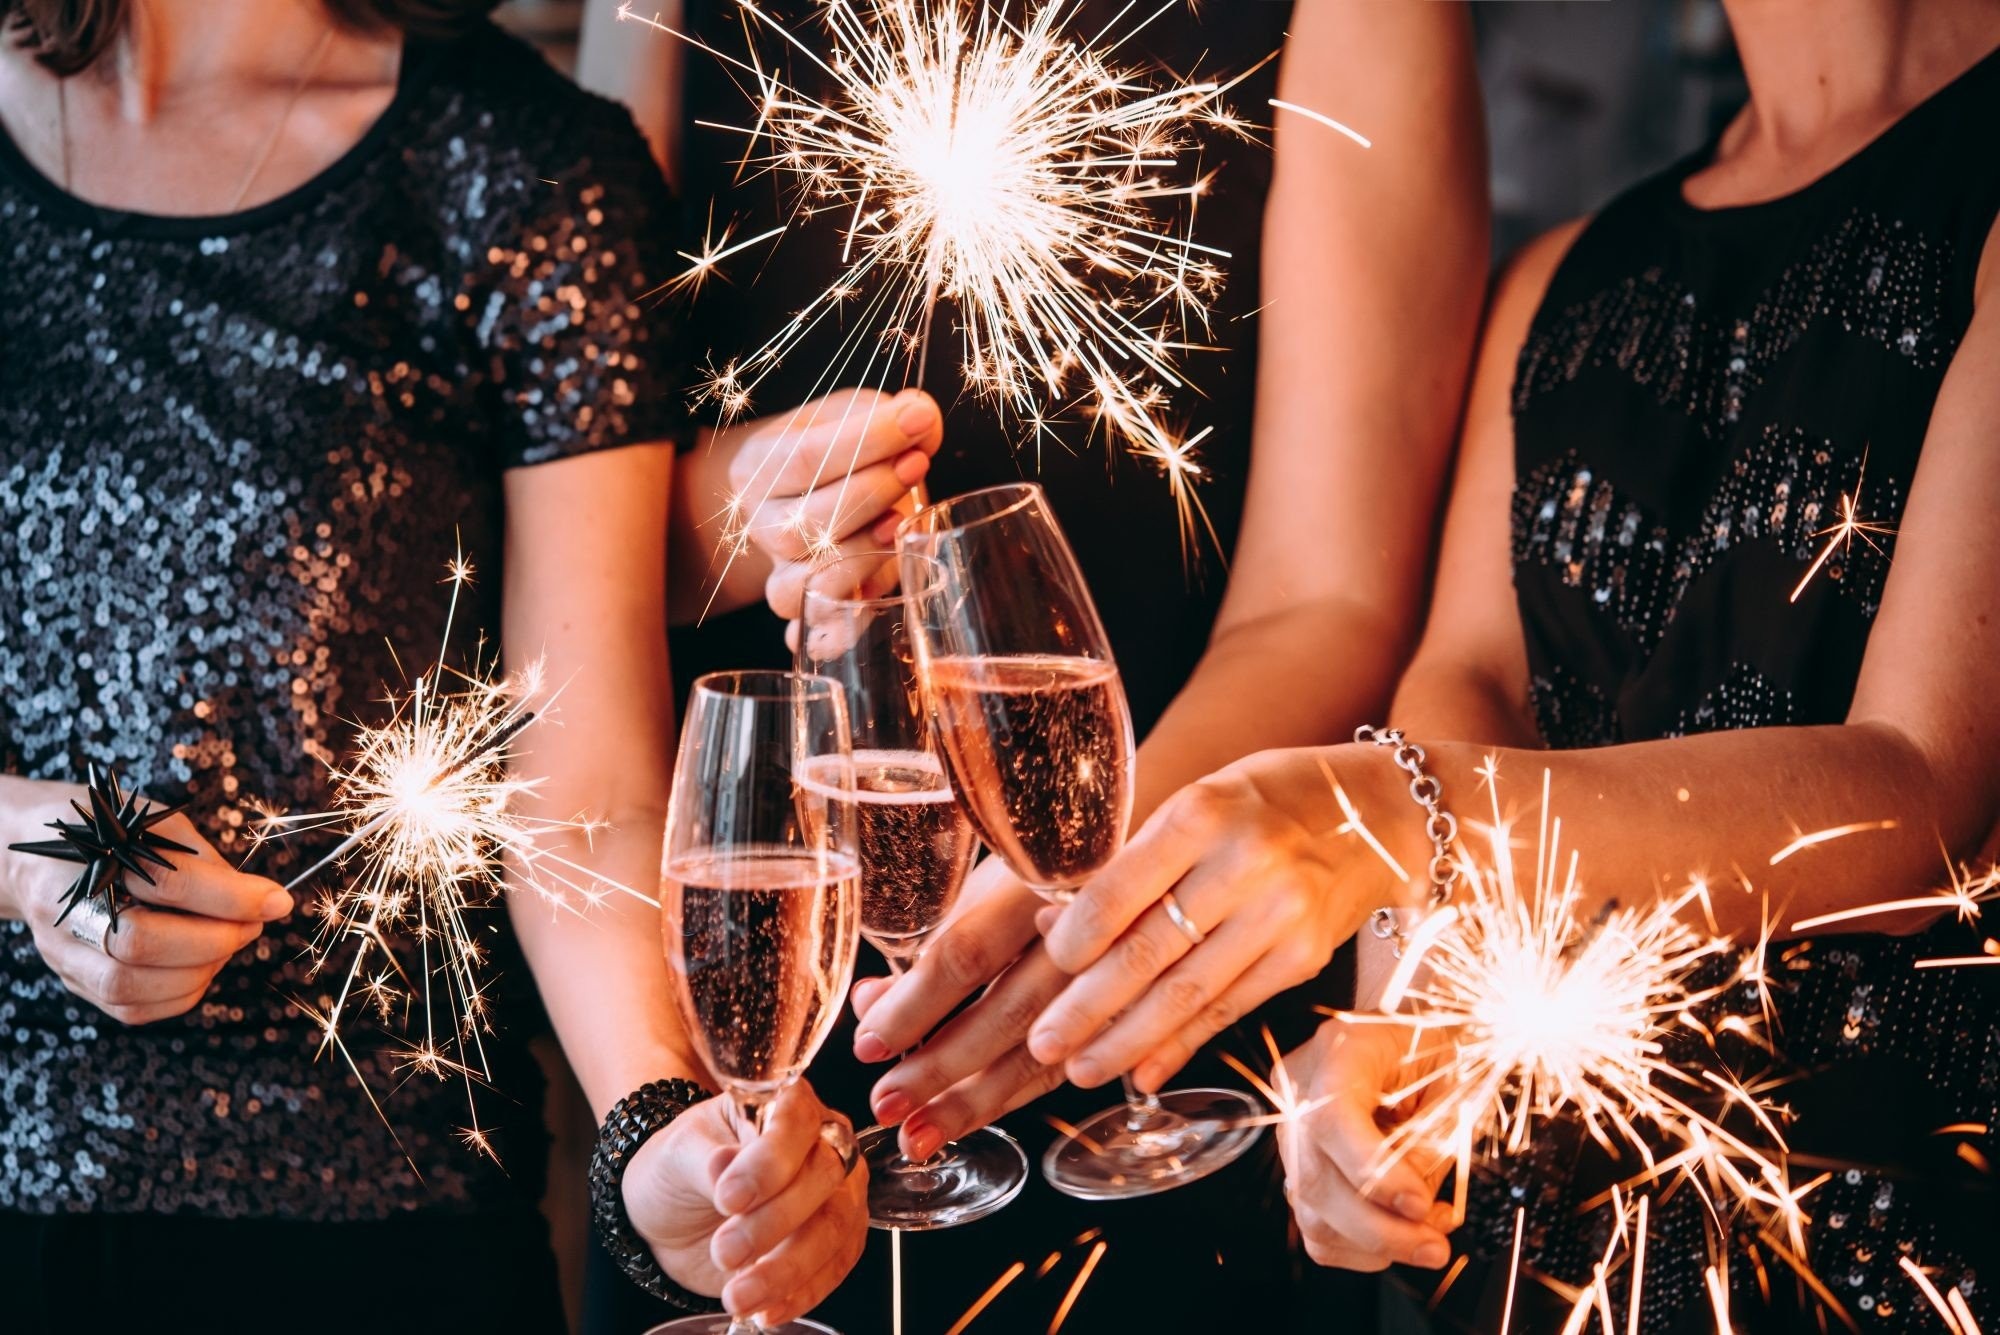 champagne-cheers-sparklers-getty-1119-2000.jpg